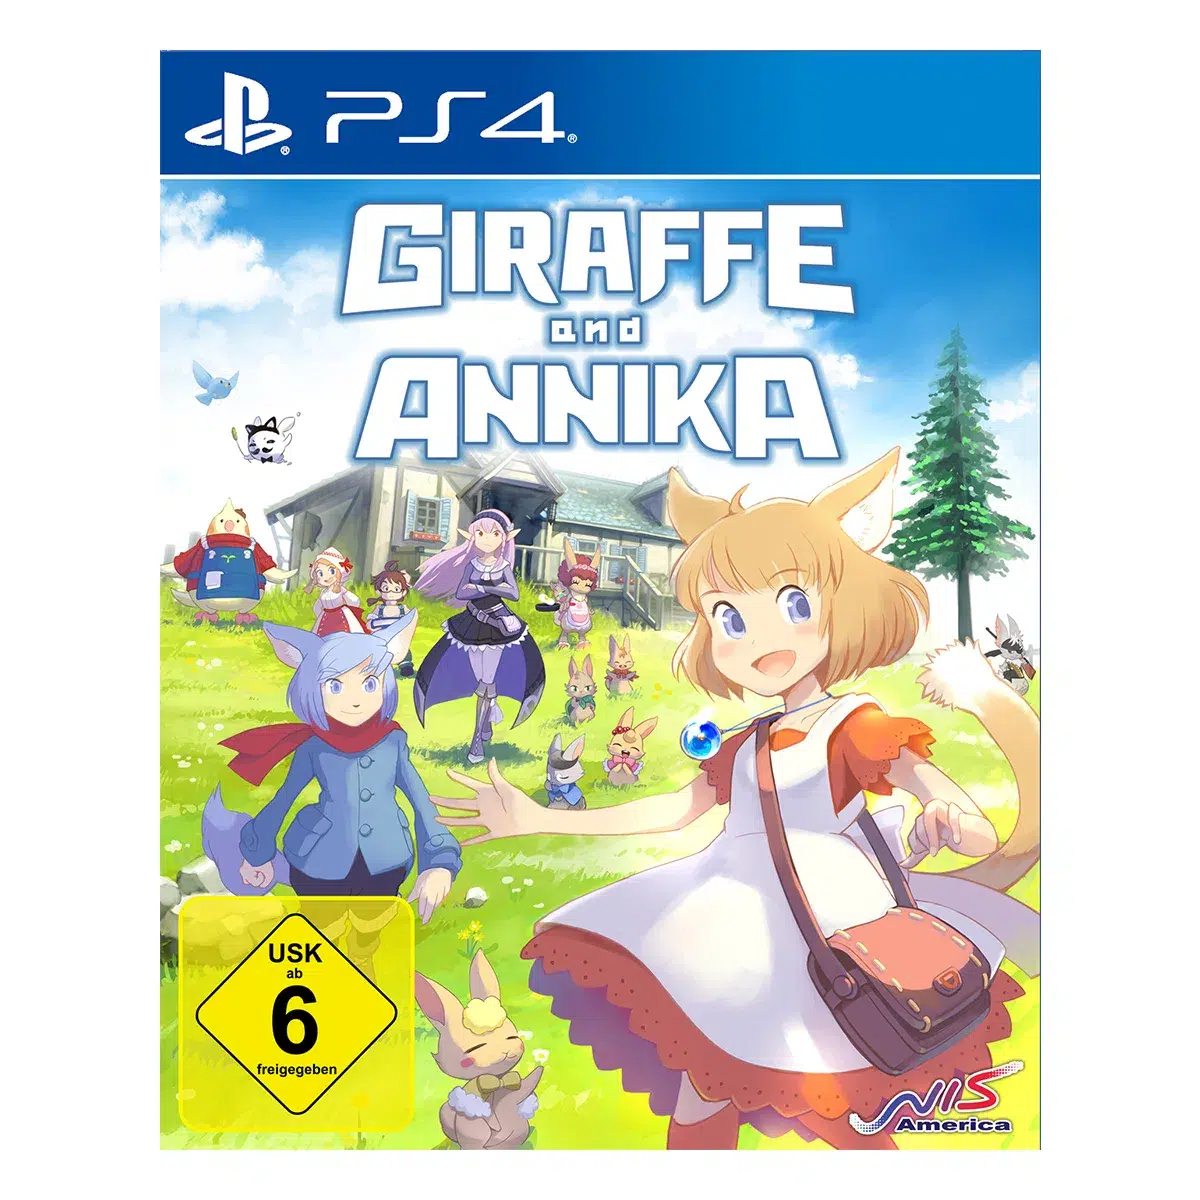 Giraffe and Annika Limited Edition - PS4